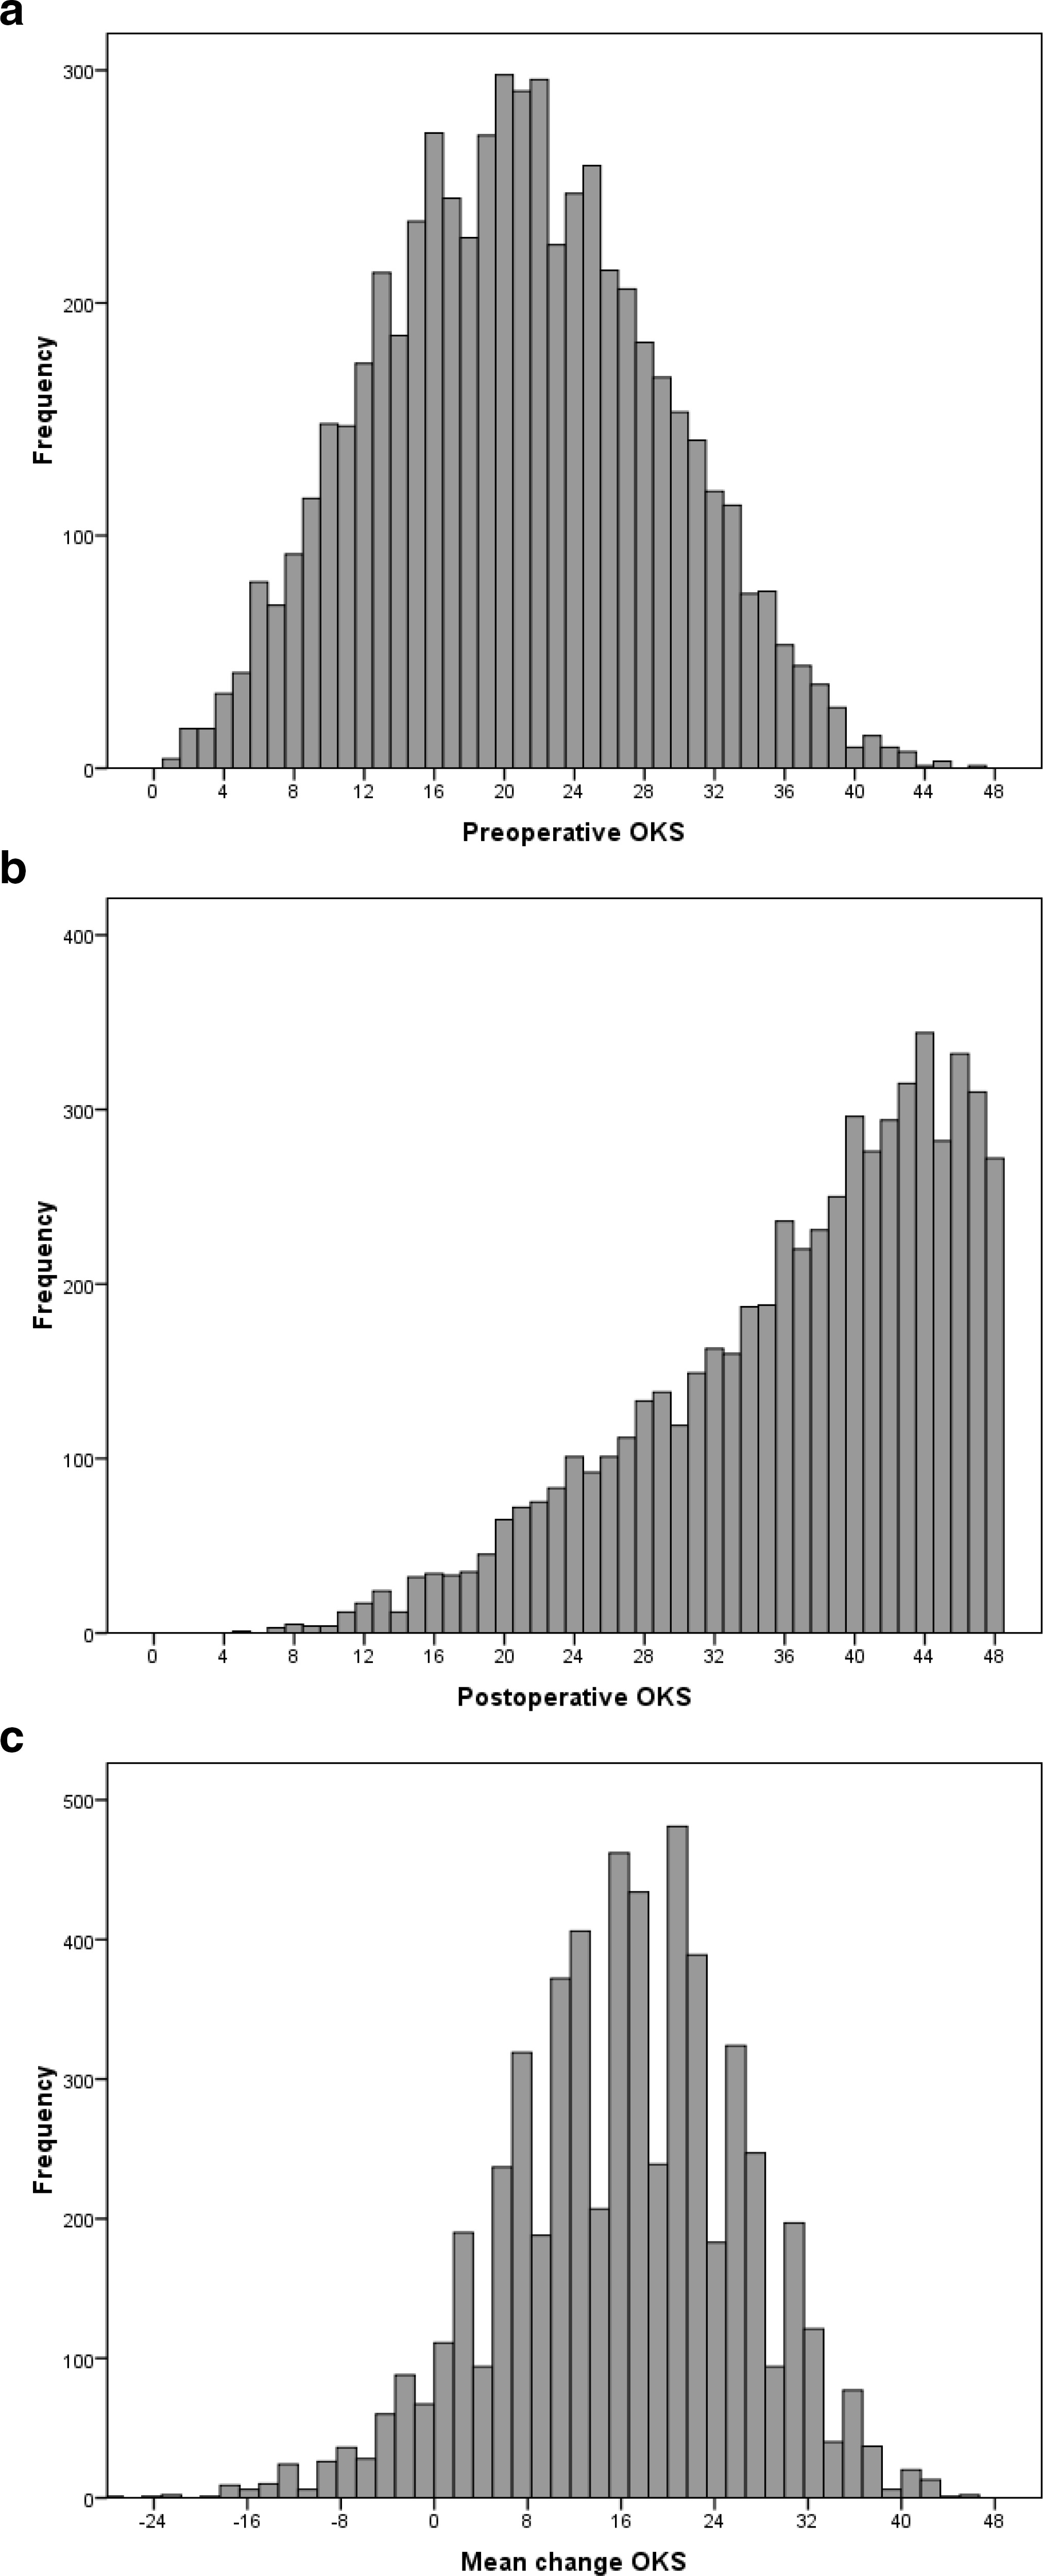 Fig. 1 
            Histograms illustrating the distribution of the a) preoperative, b) postoperative, and c) change in the Oxford Knee Score (OKS) after total knee arthroplasty.
          